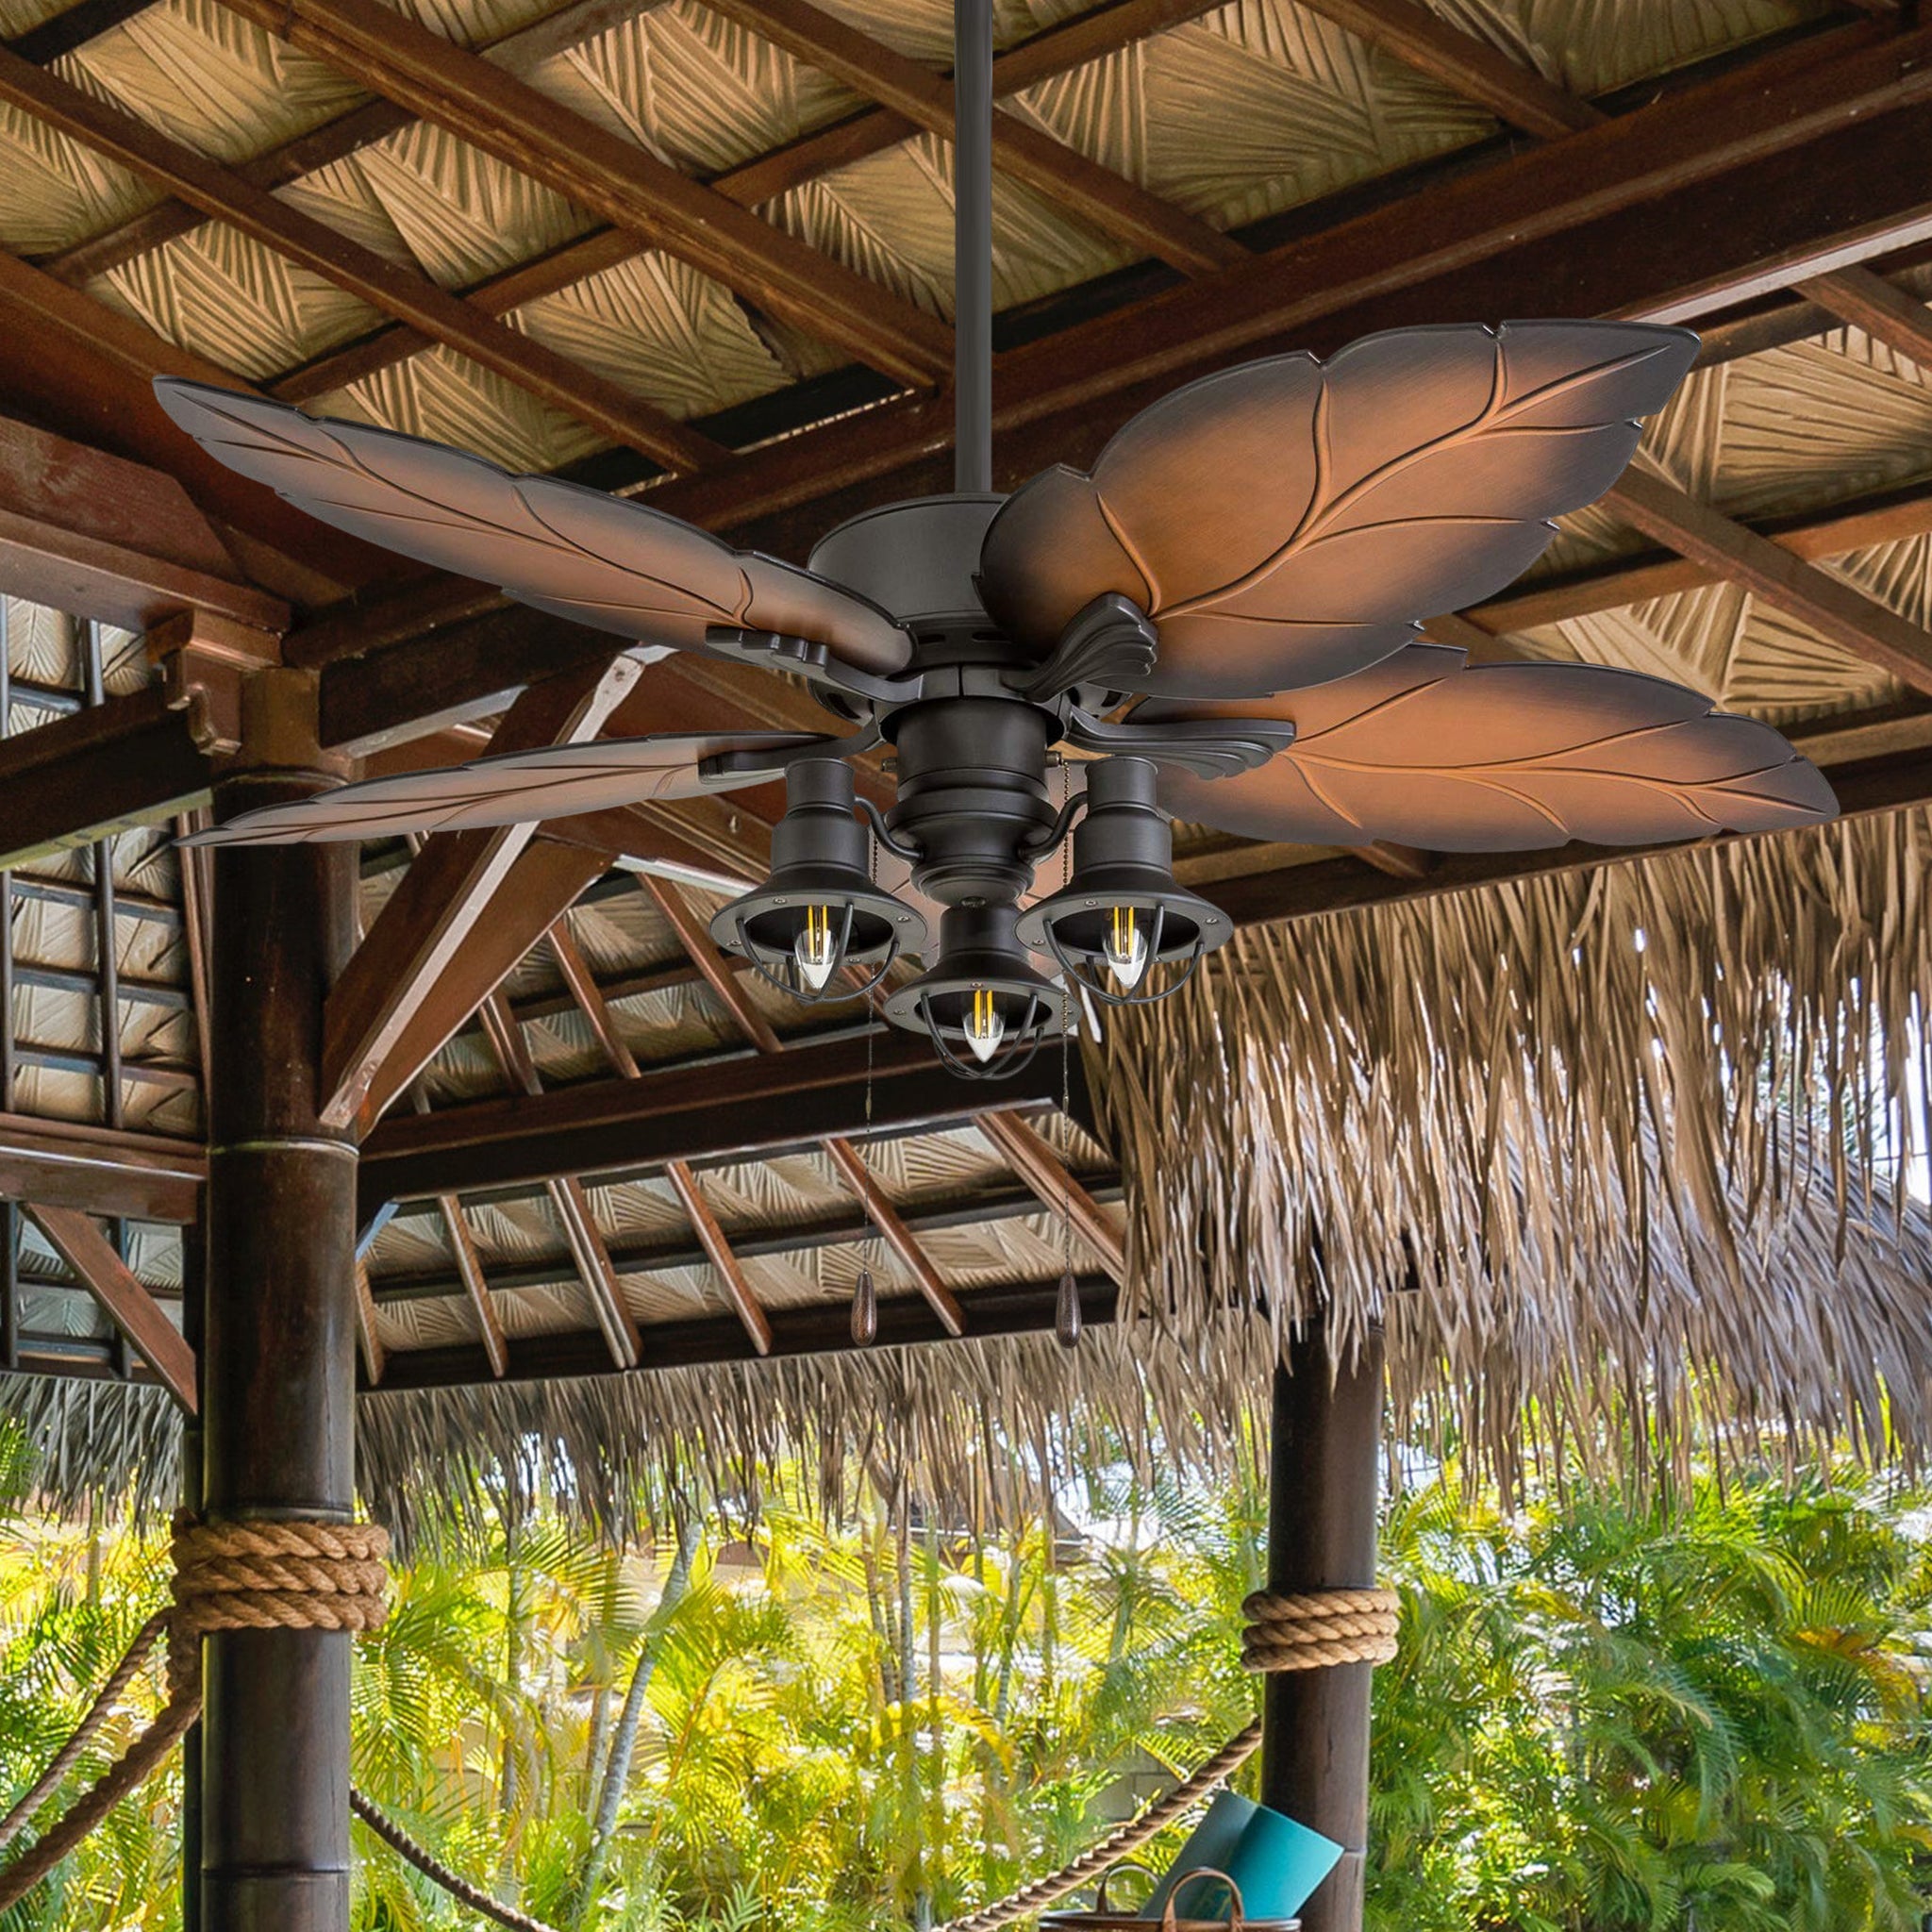 52 Inch Ocean Crest, Bronze, Pull Chain, Indoor/Outdoor Ceiling Fan by Prominence Home